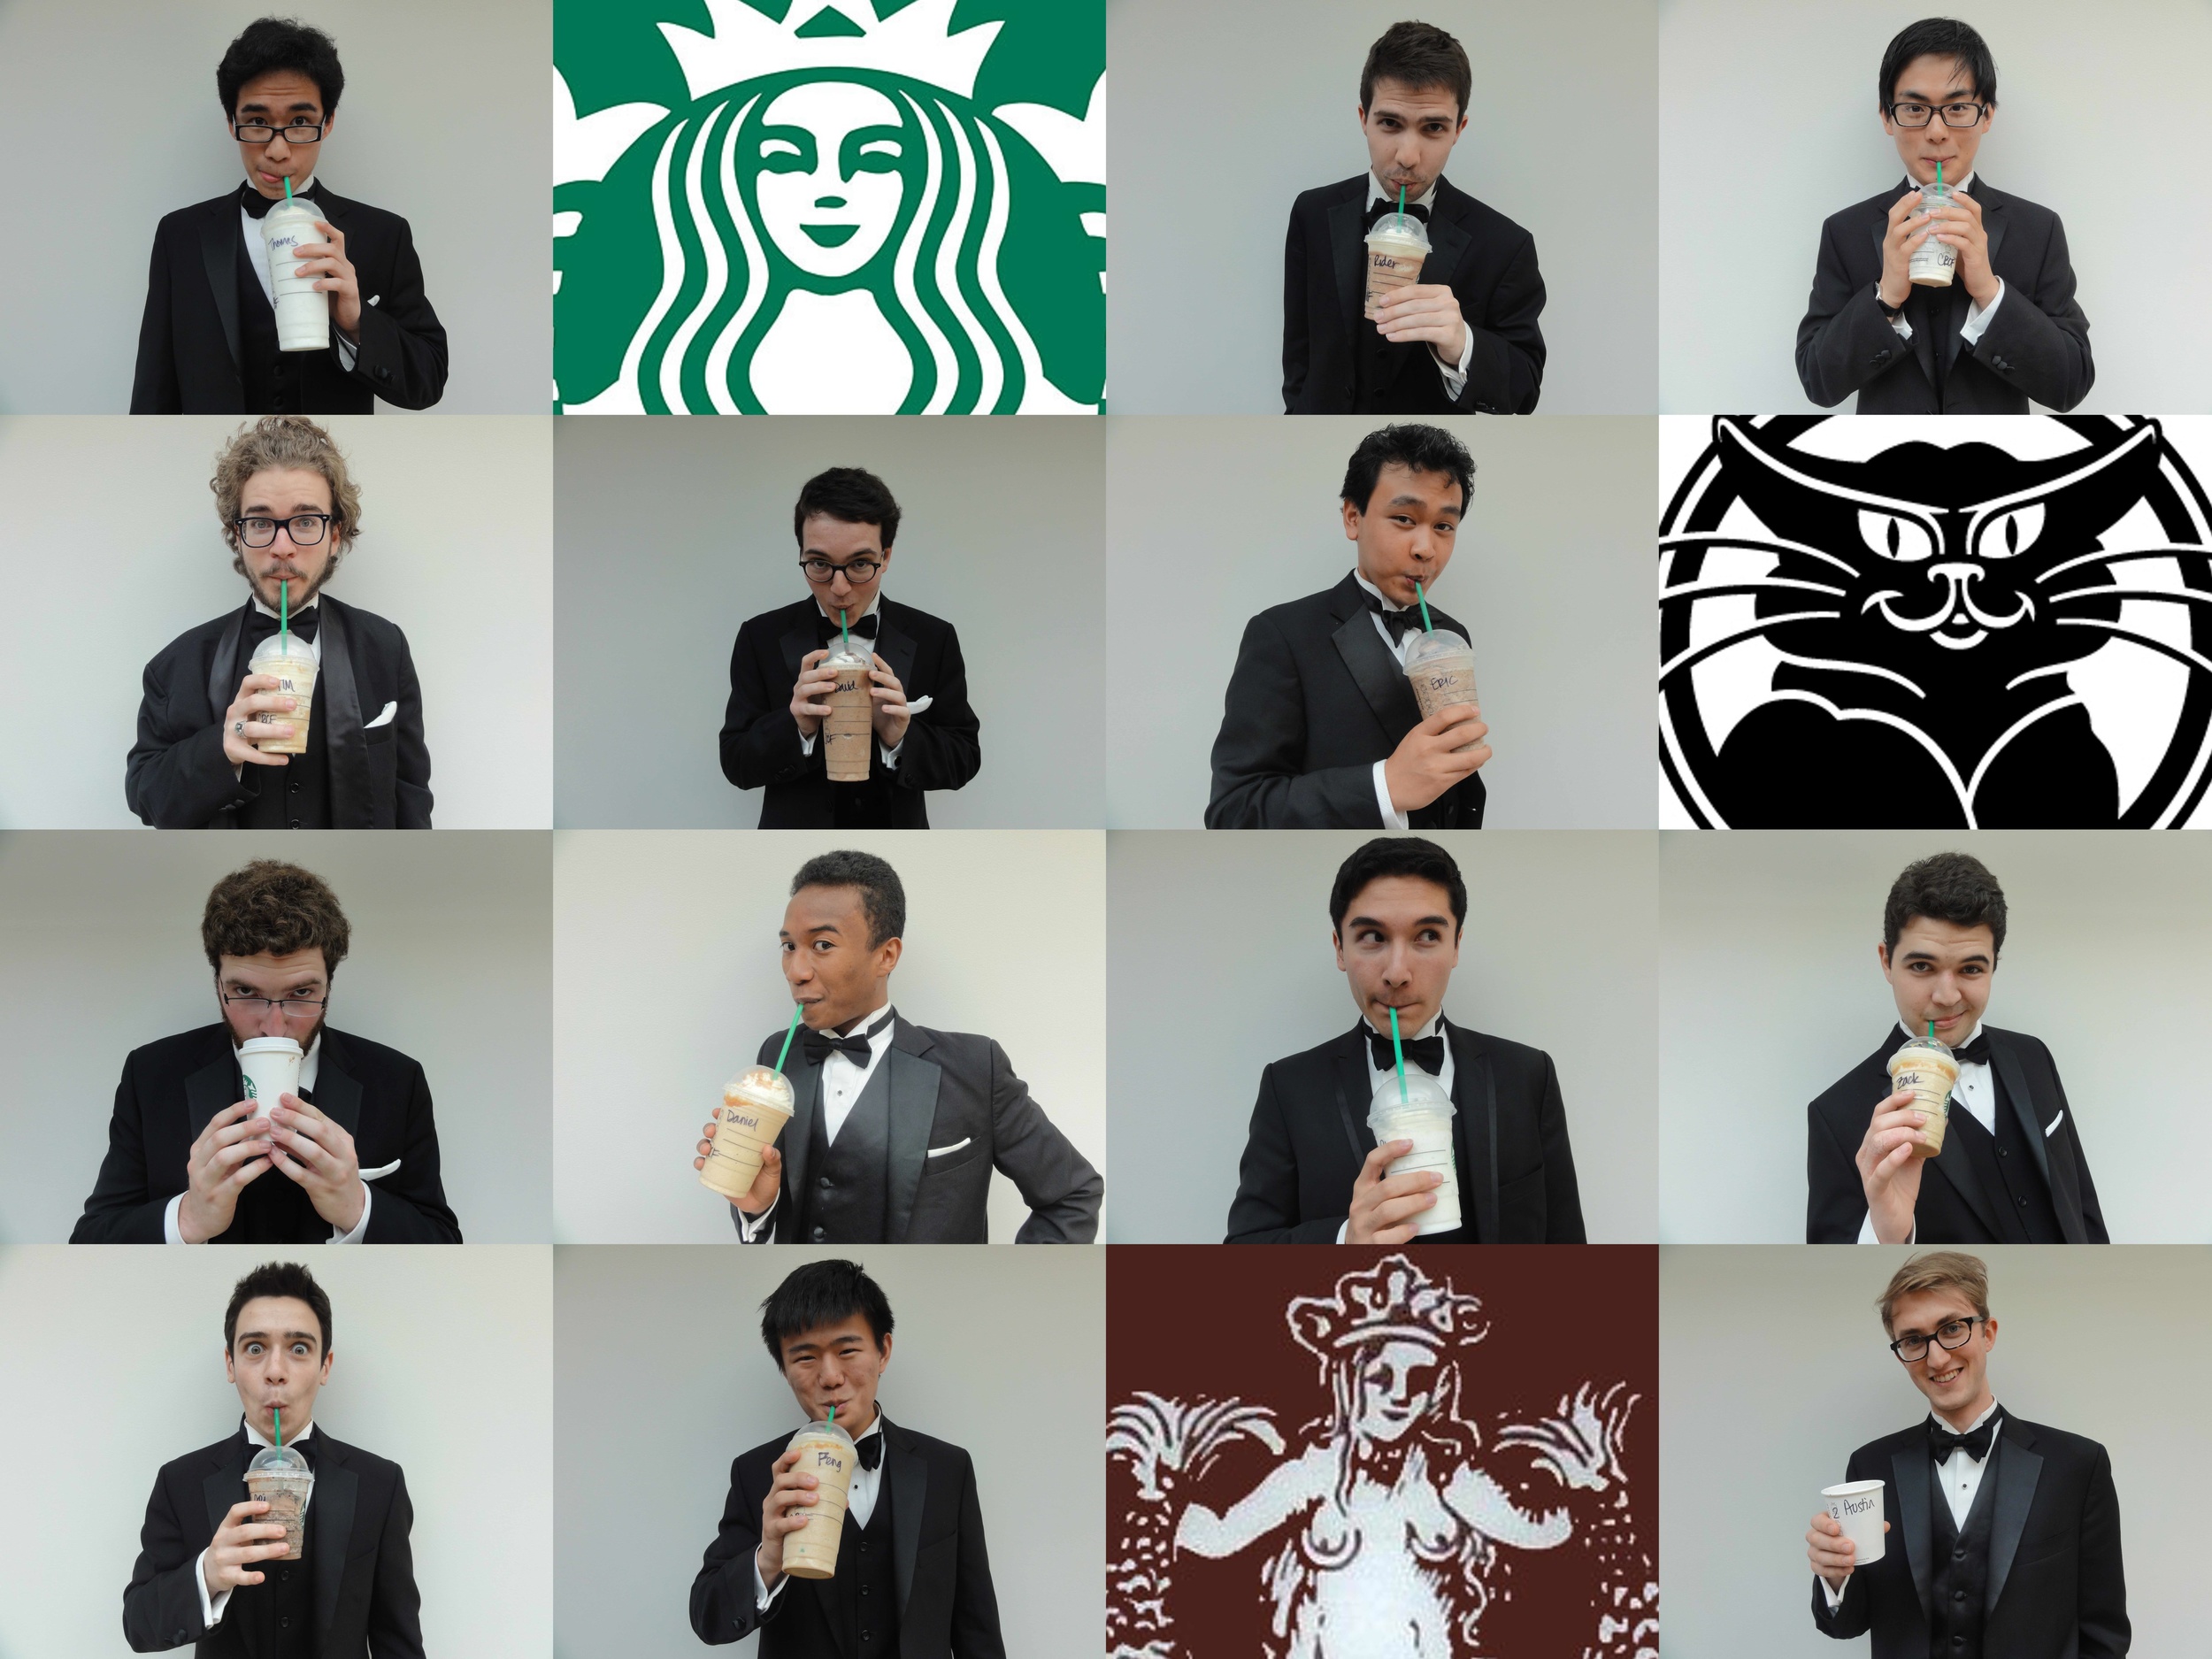 The Alley Cats express their love for Starbucks, in their own way